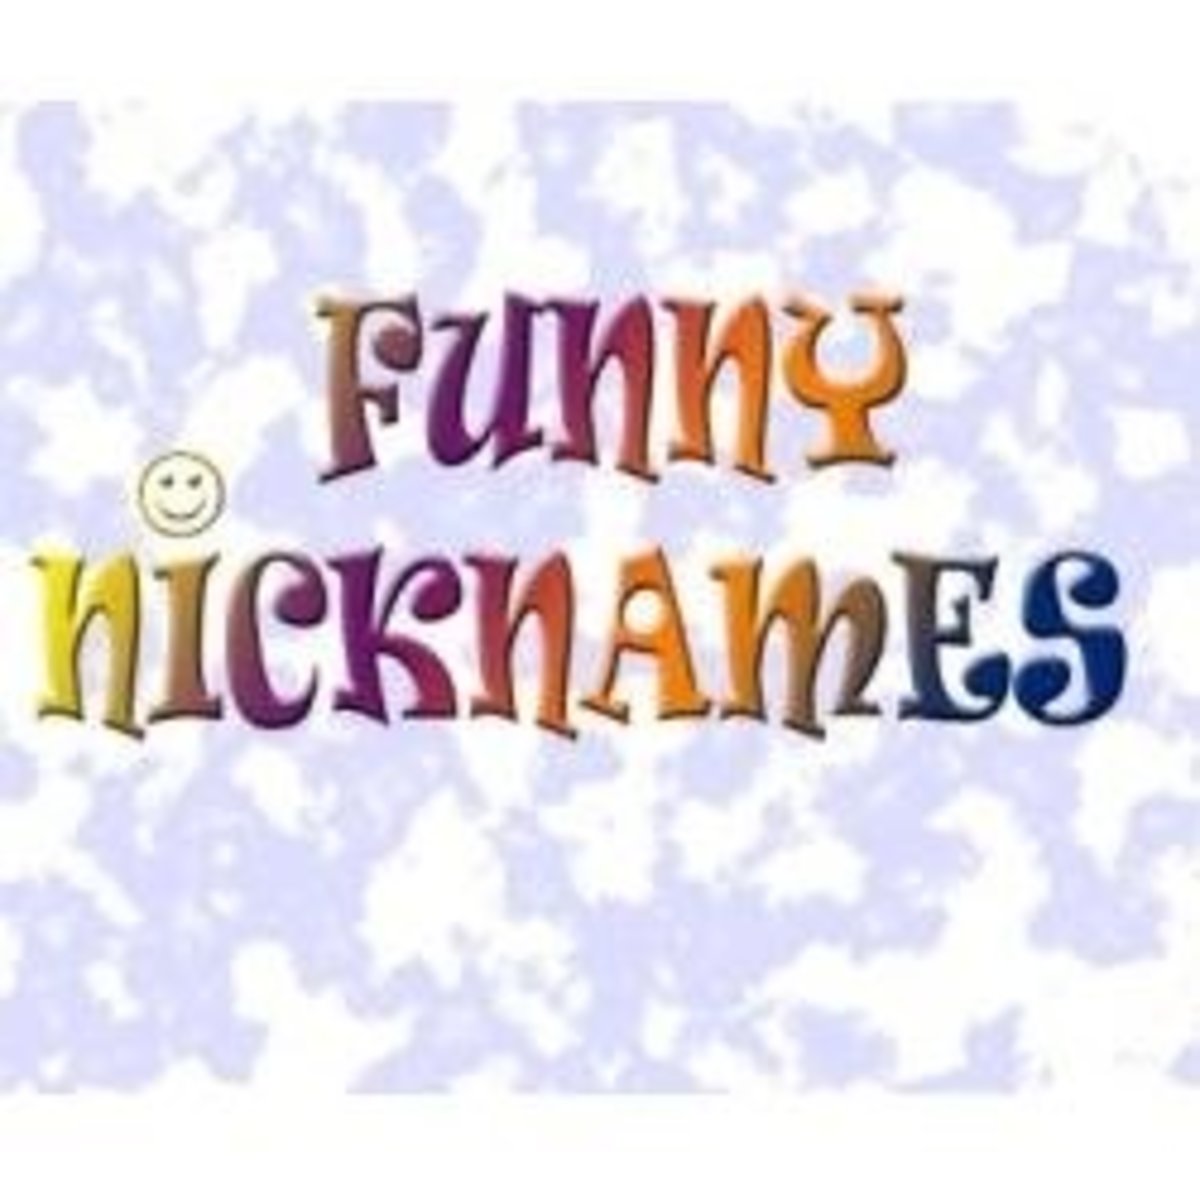 List of Funny Nicknames HubPages